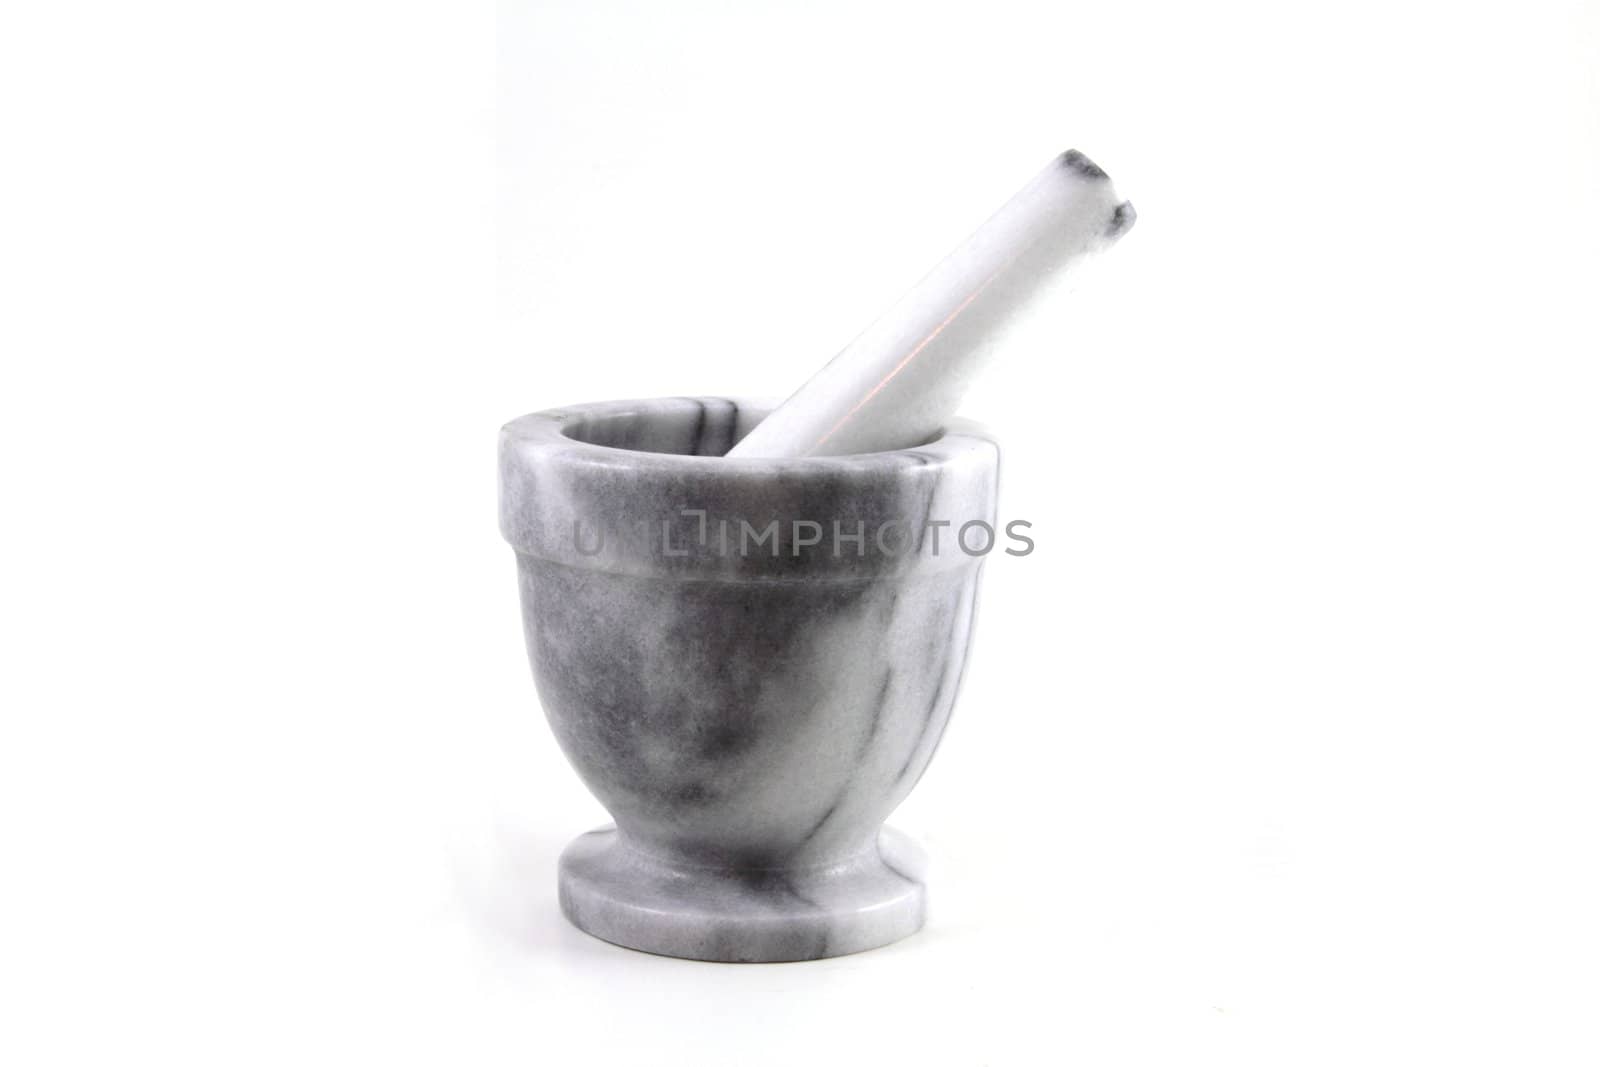 A Pharmacist Pestle and Mortar isolated on white.